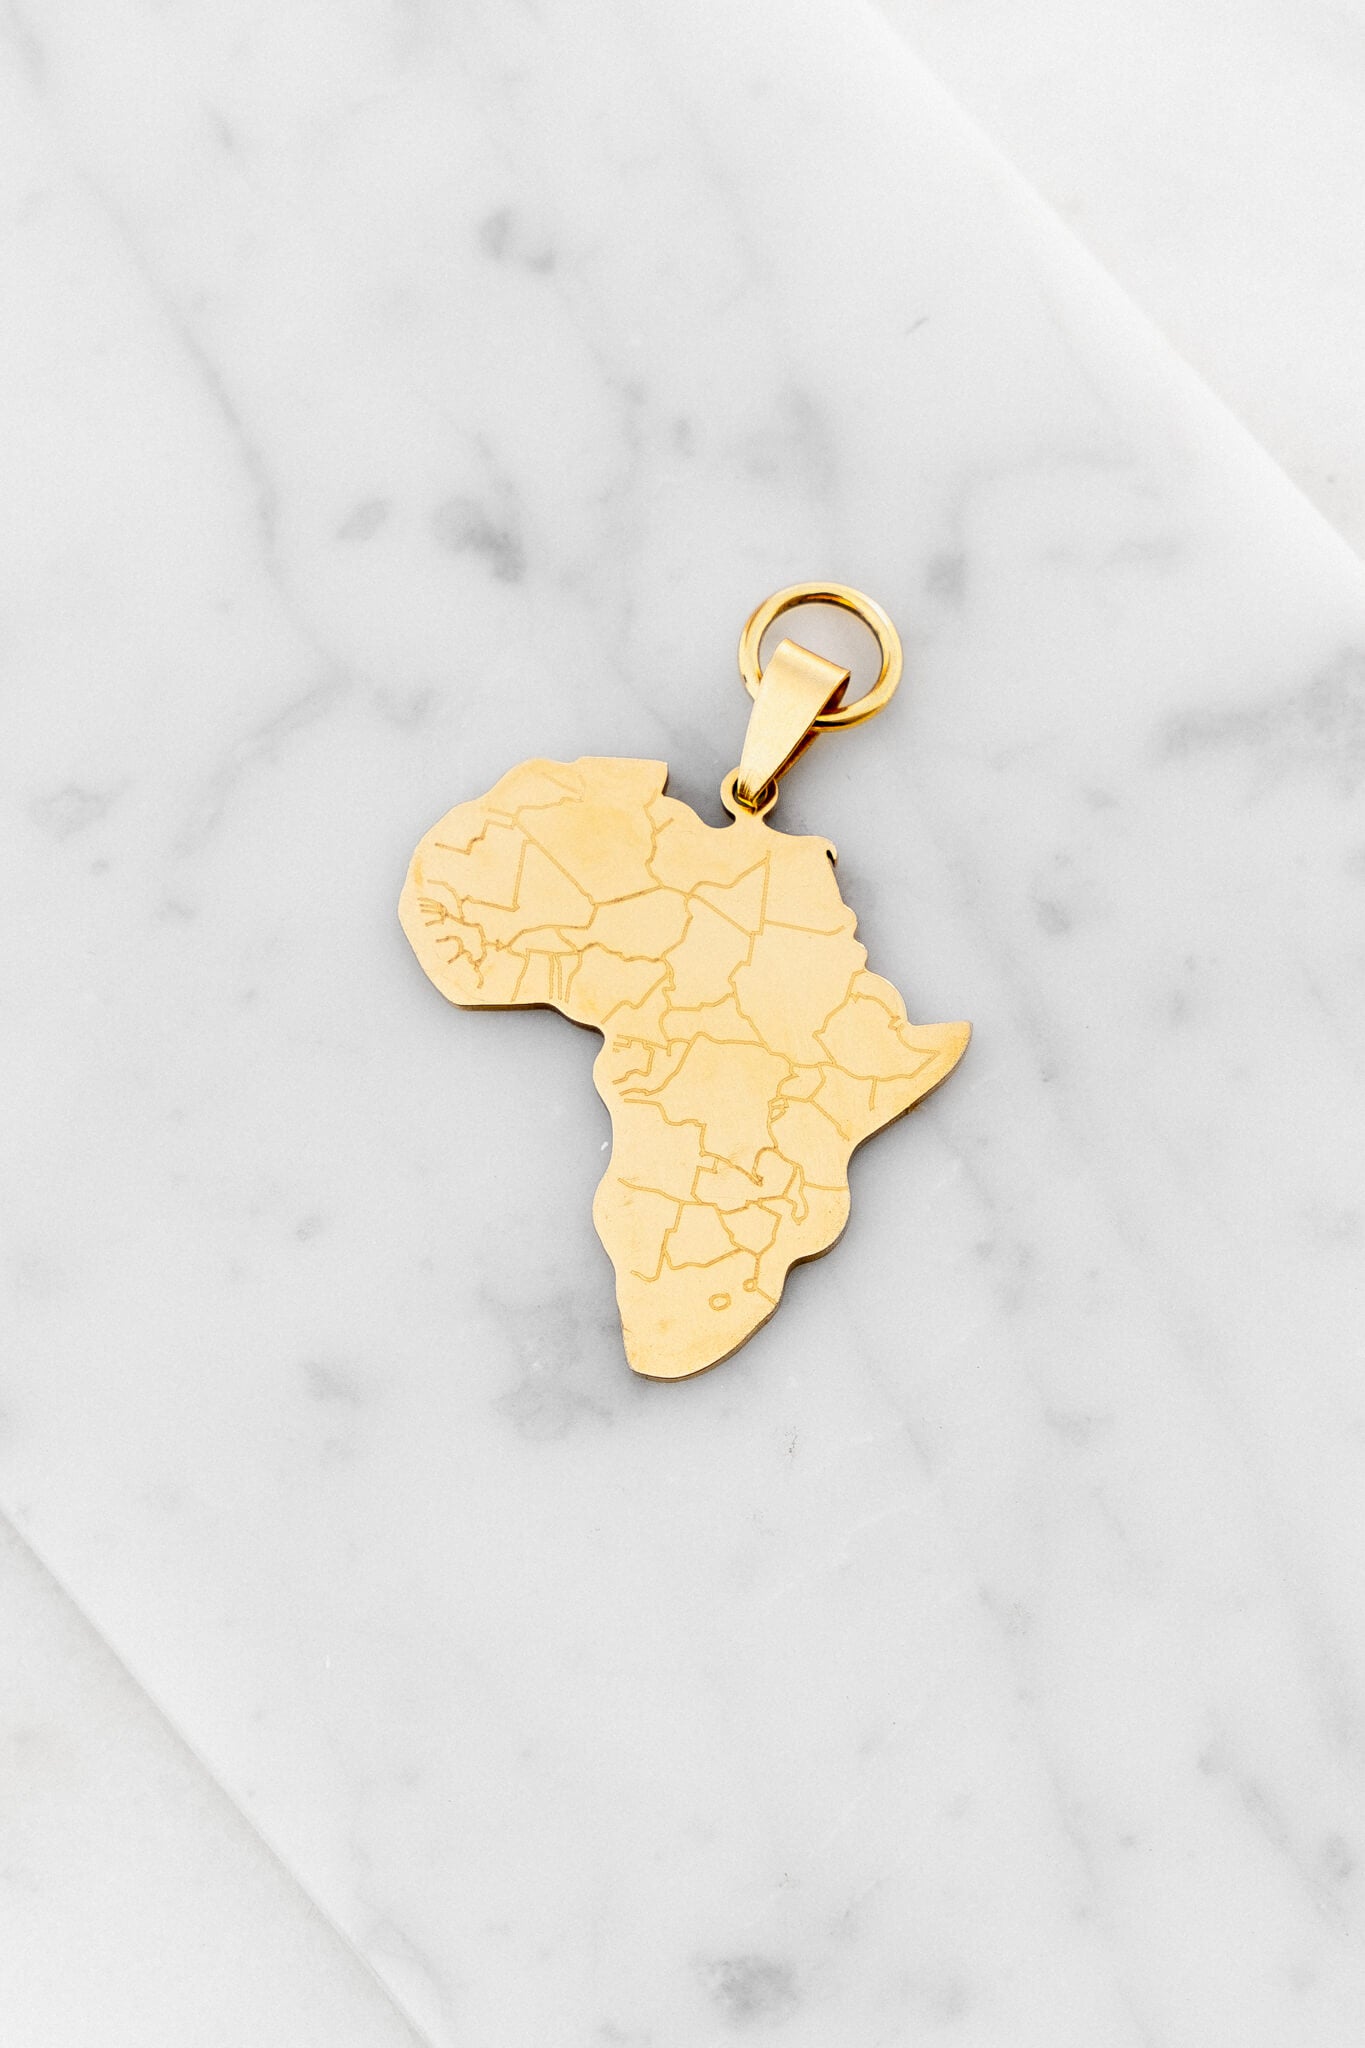 Womankind Africa charm in Gold laying on a marble